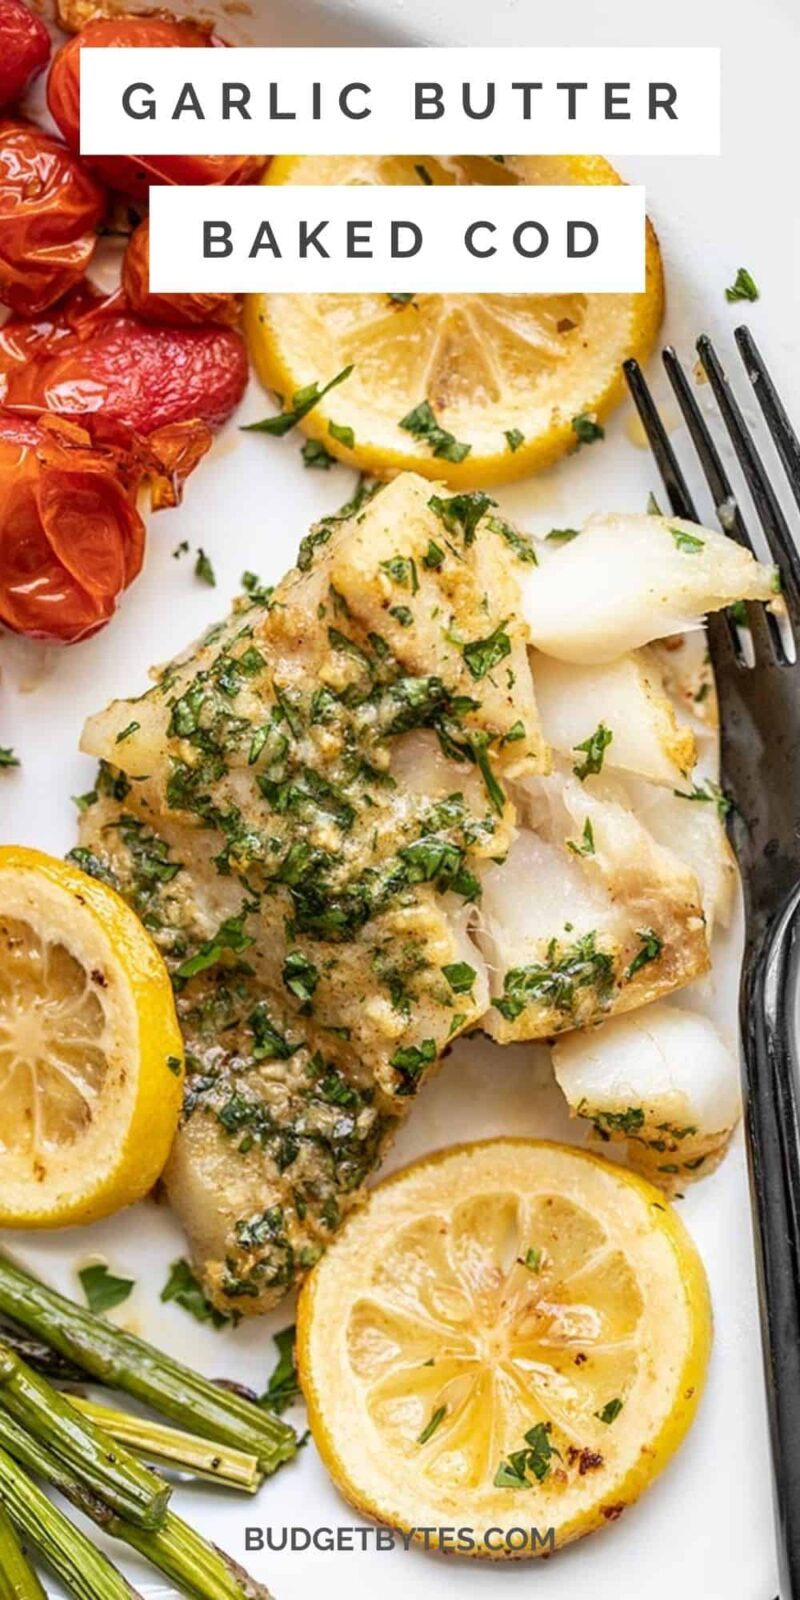 Close up of garlic butter baked cod on a plate, title text at the top